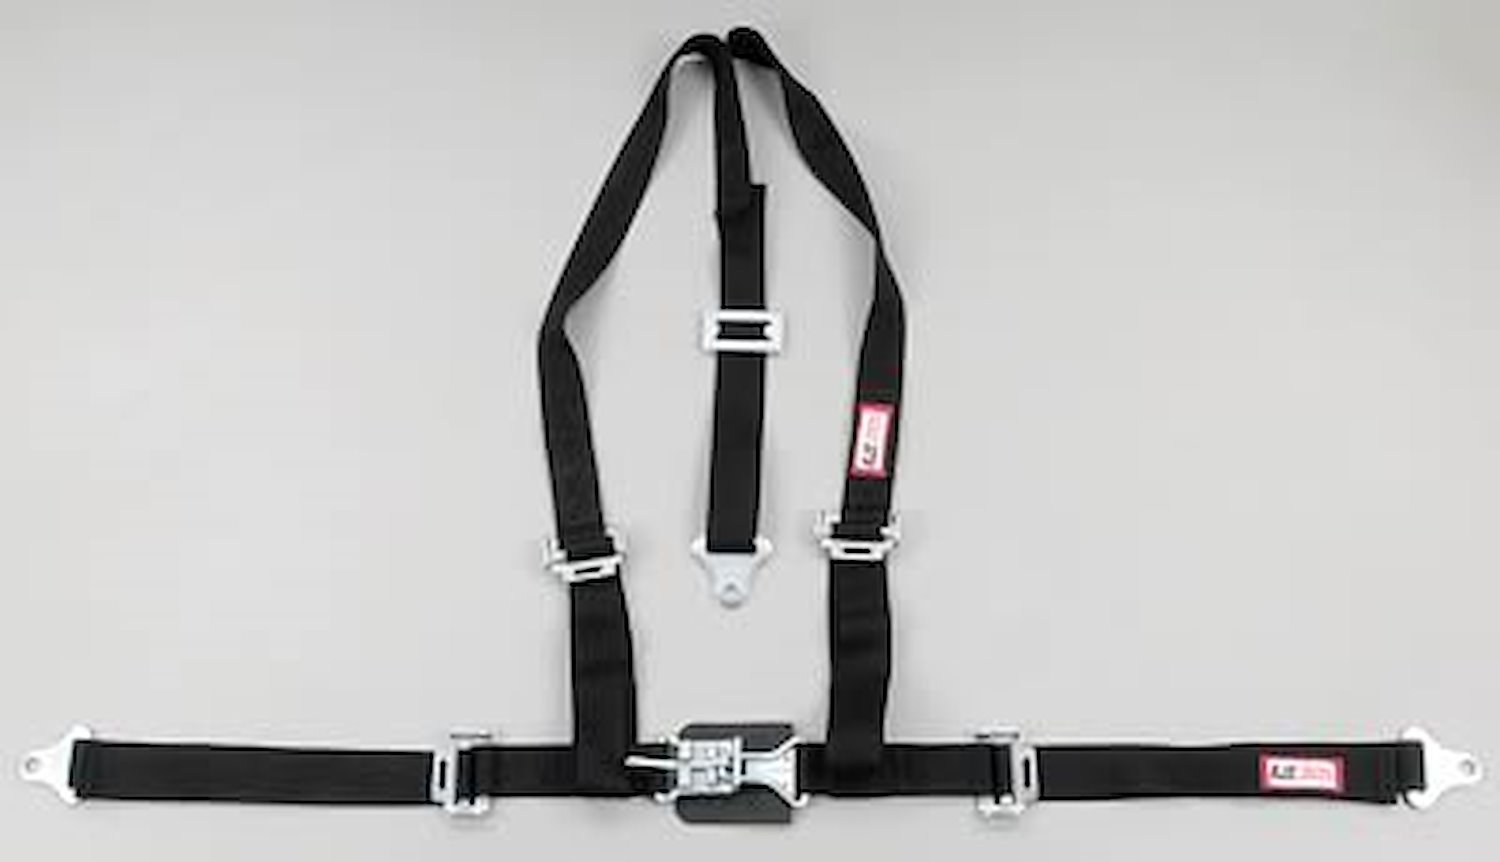 NON-SFI L&L HARNESS 3 PULL DOWN Lap Belt w/adjuster 2 S.H. Individual FLOOR Mount w/STERNUM STRAP ALL WRAP ENDS YELLOW